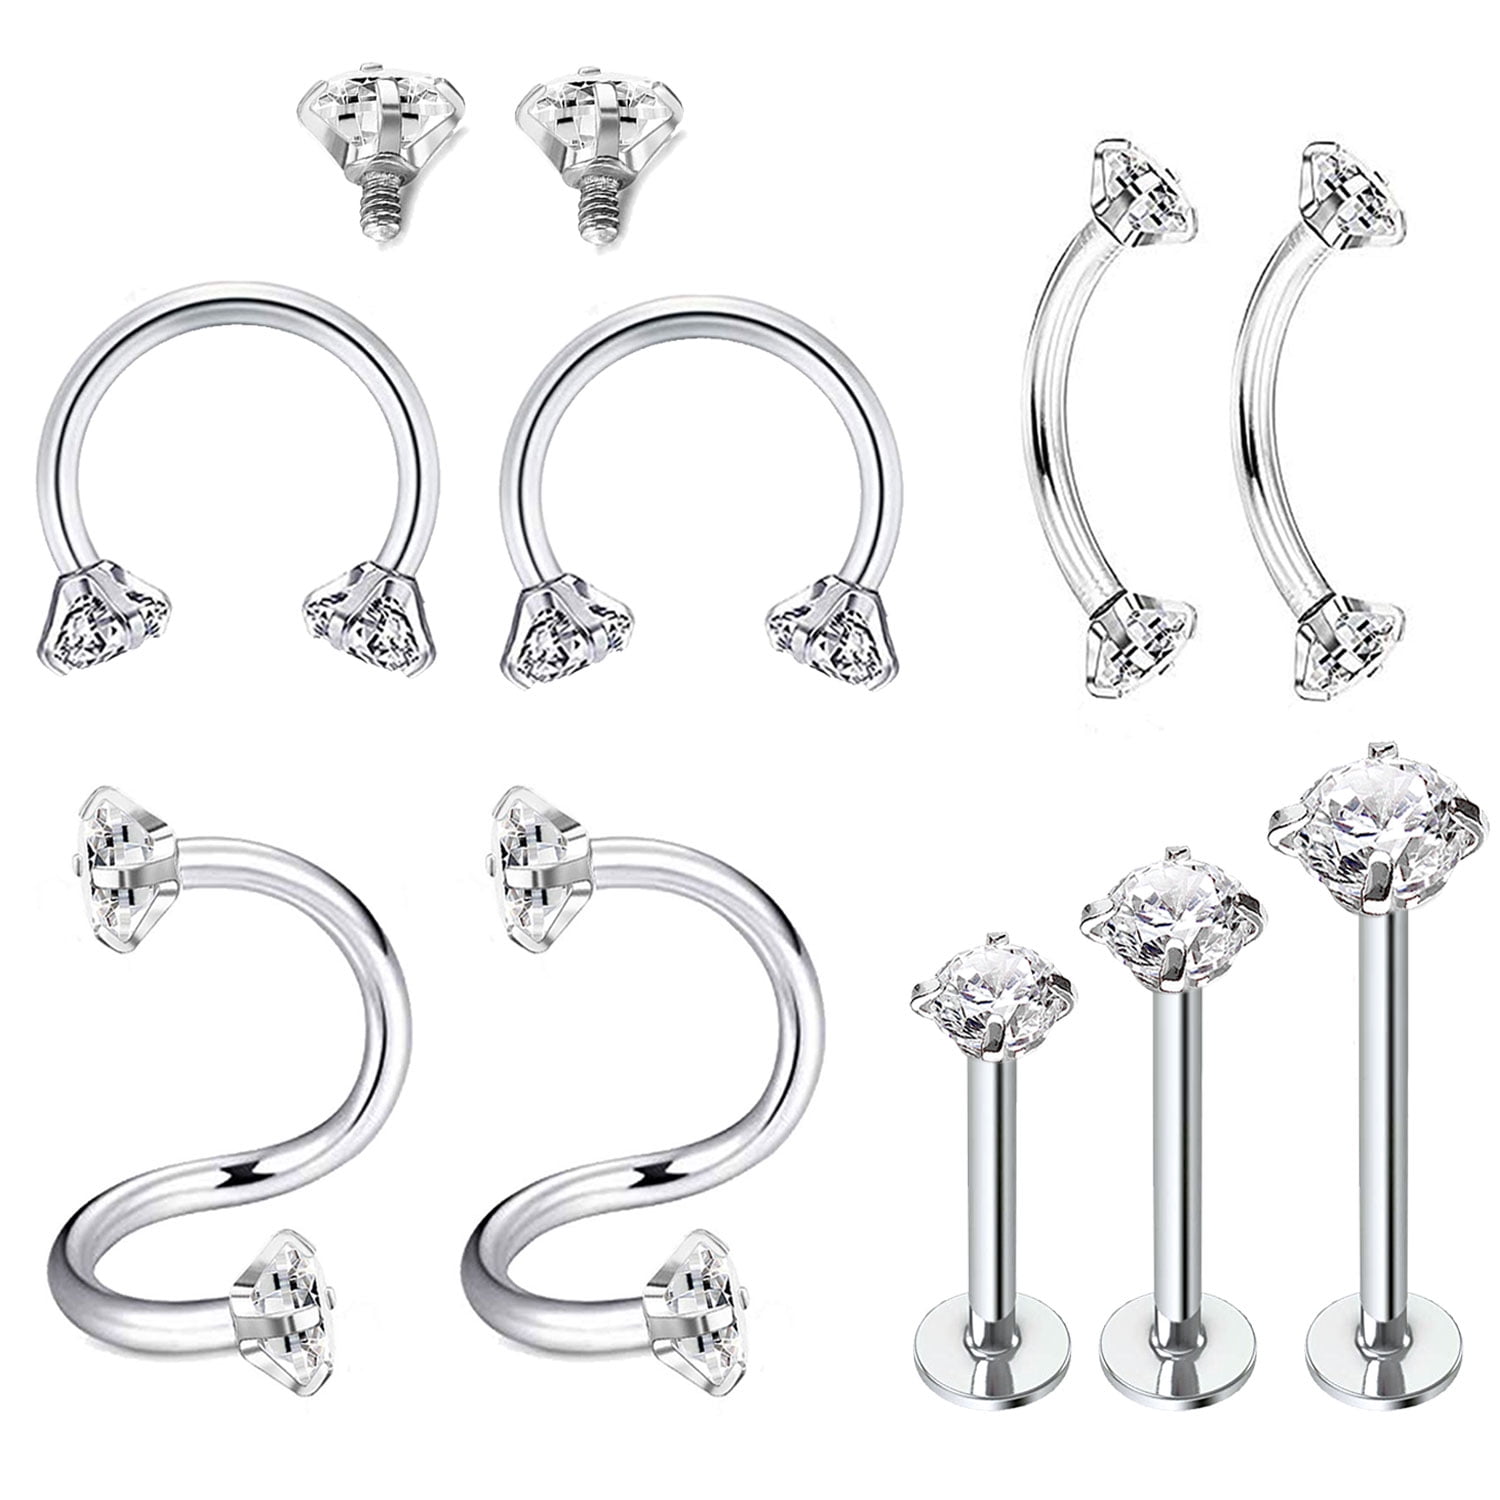 3Pcs 16g 16 gauge 1.2mm 3/8 10mm steel eyebrow lip piercing curved barbell tragus rings jewelry BBIH